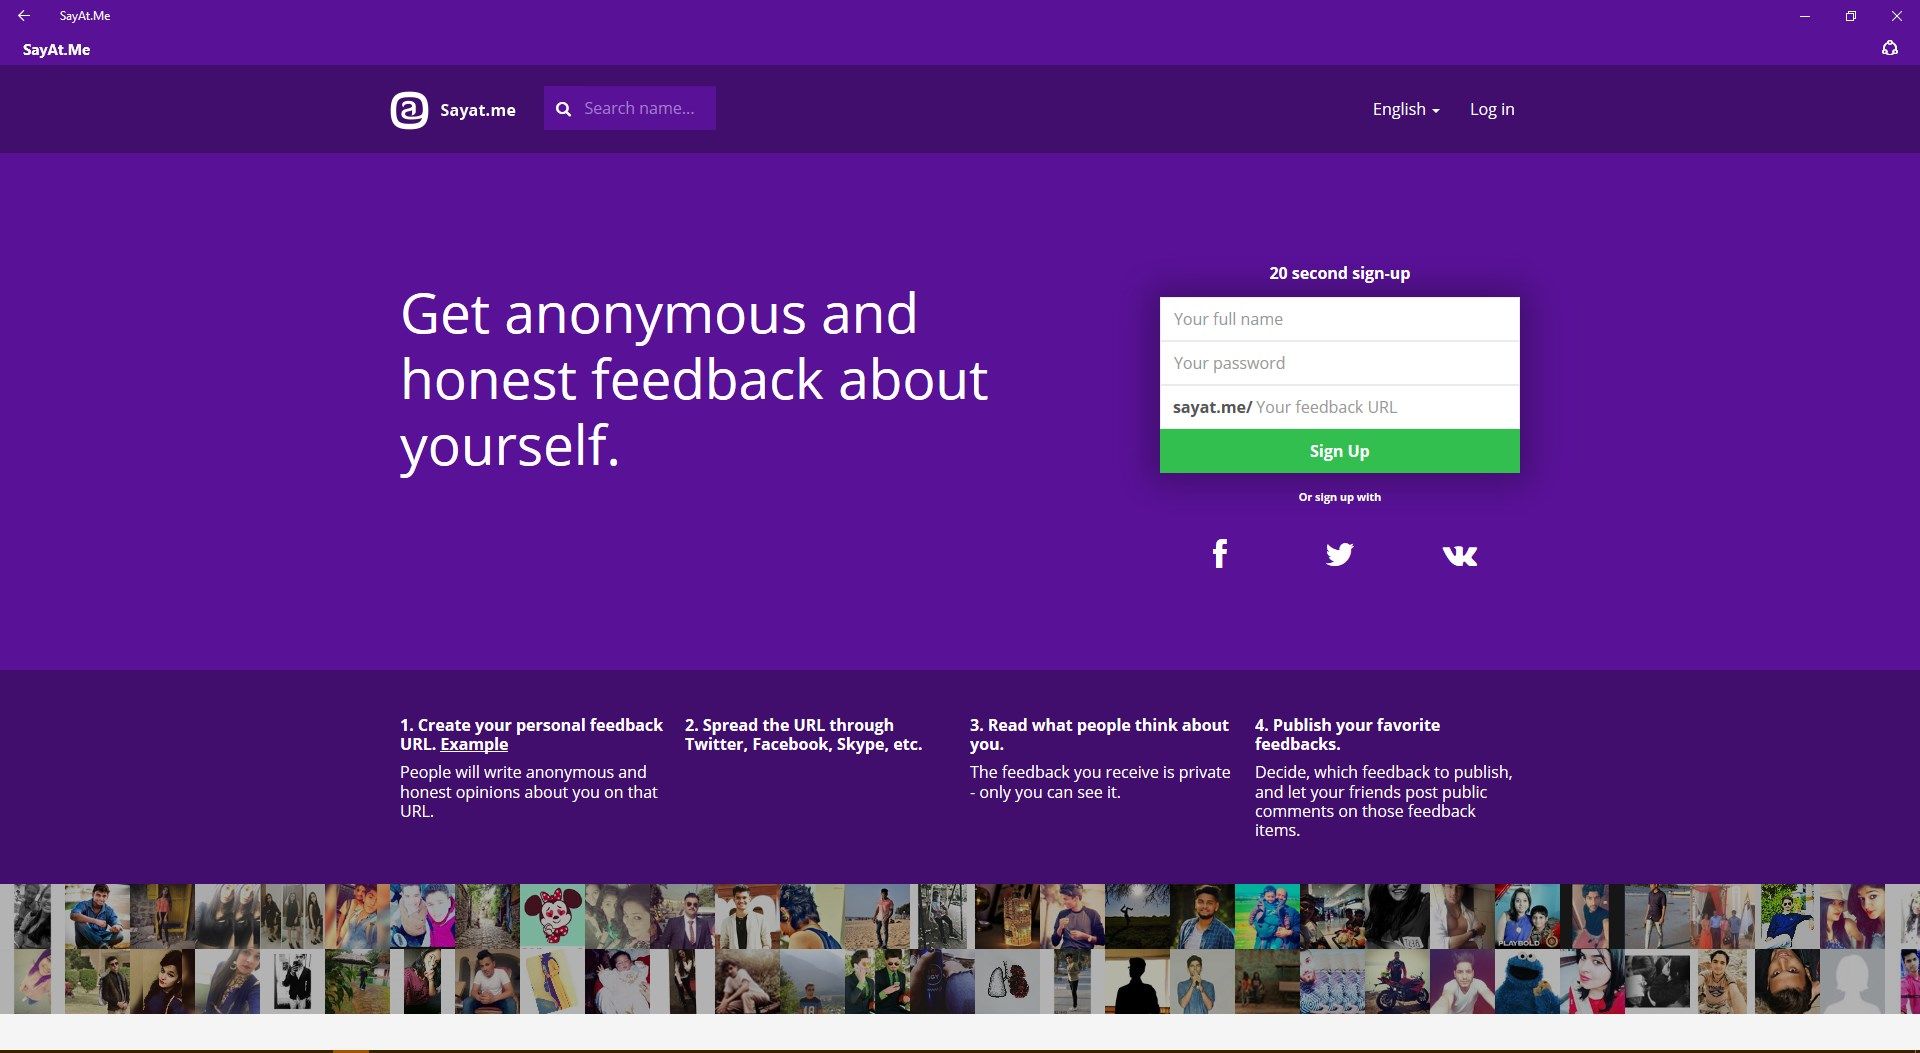 Sayt.Me - Get anonymous and honest feedback about yourself.